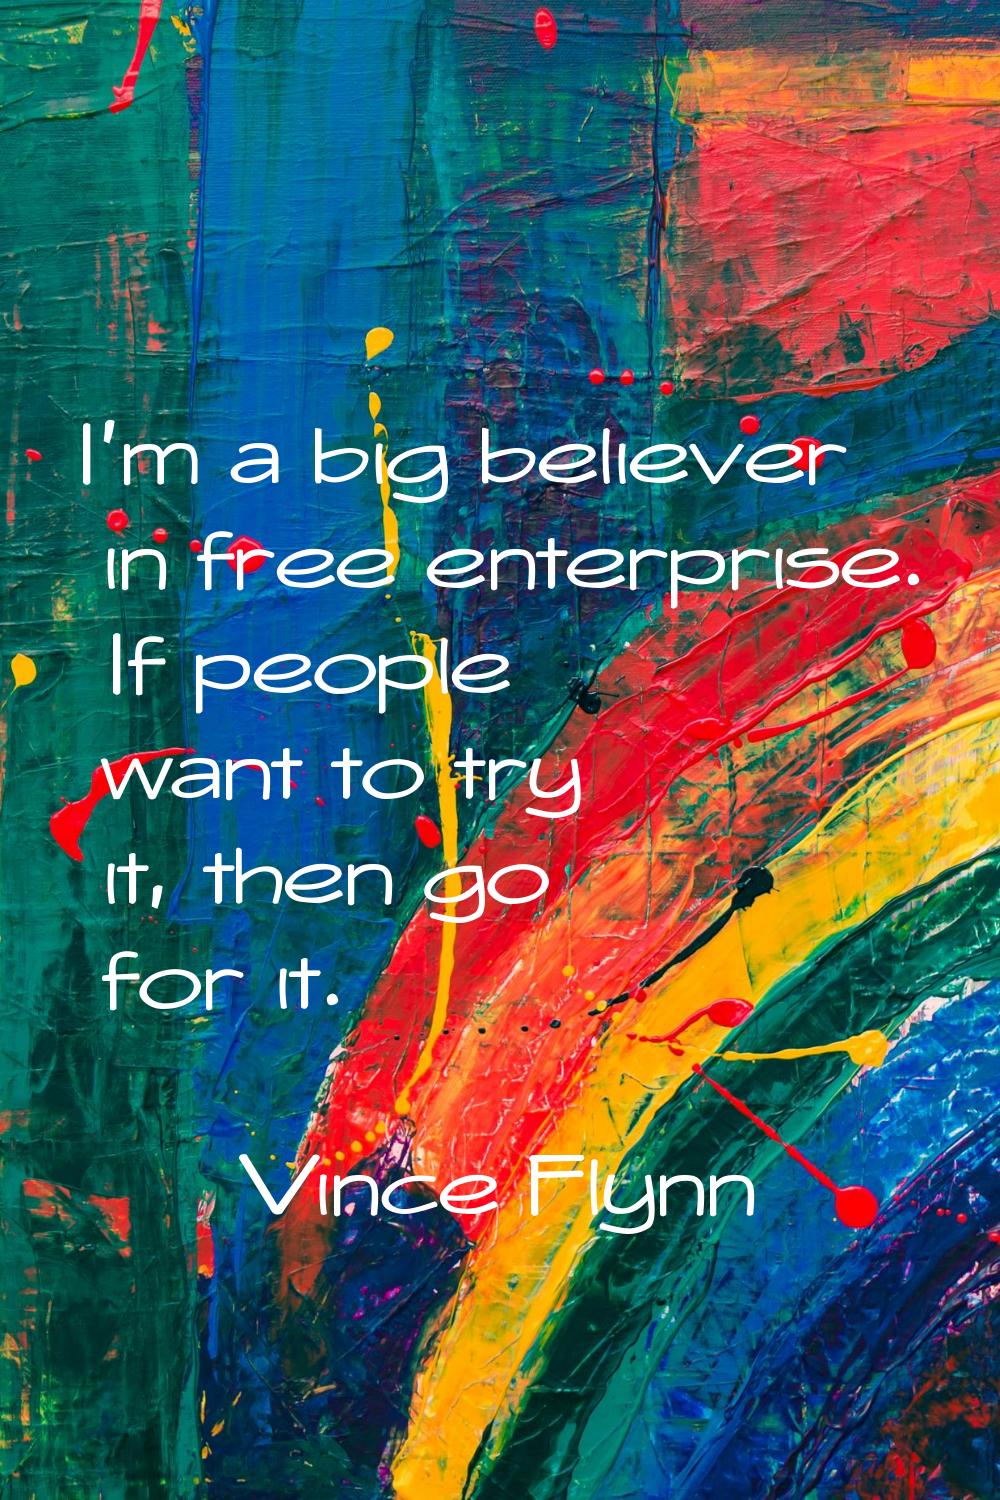 I'm a big believer in free enterprise. If people want to try it, then go for it.